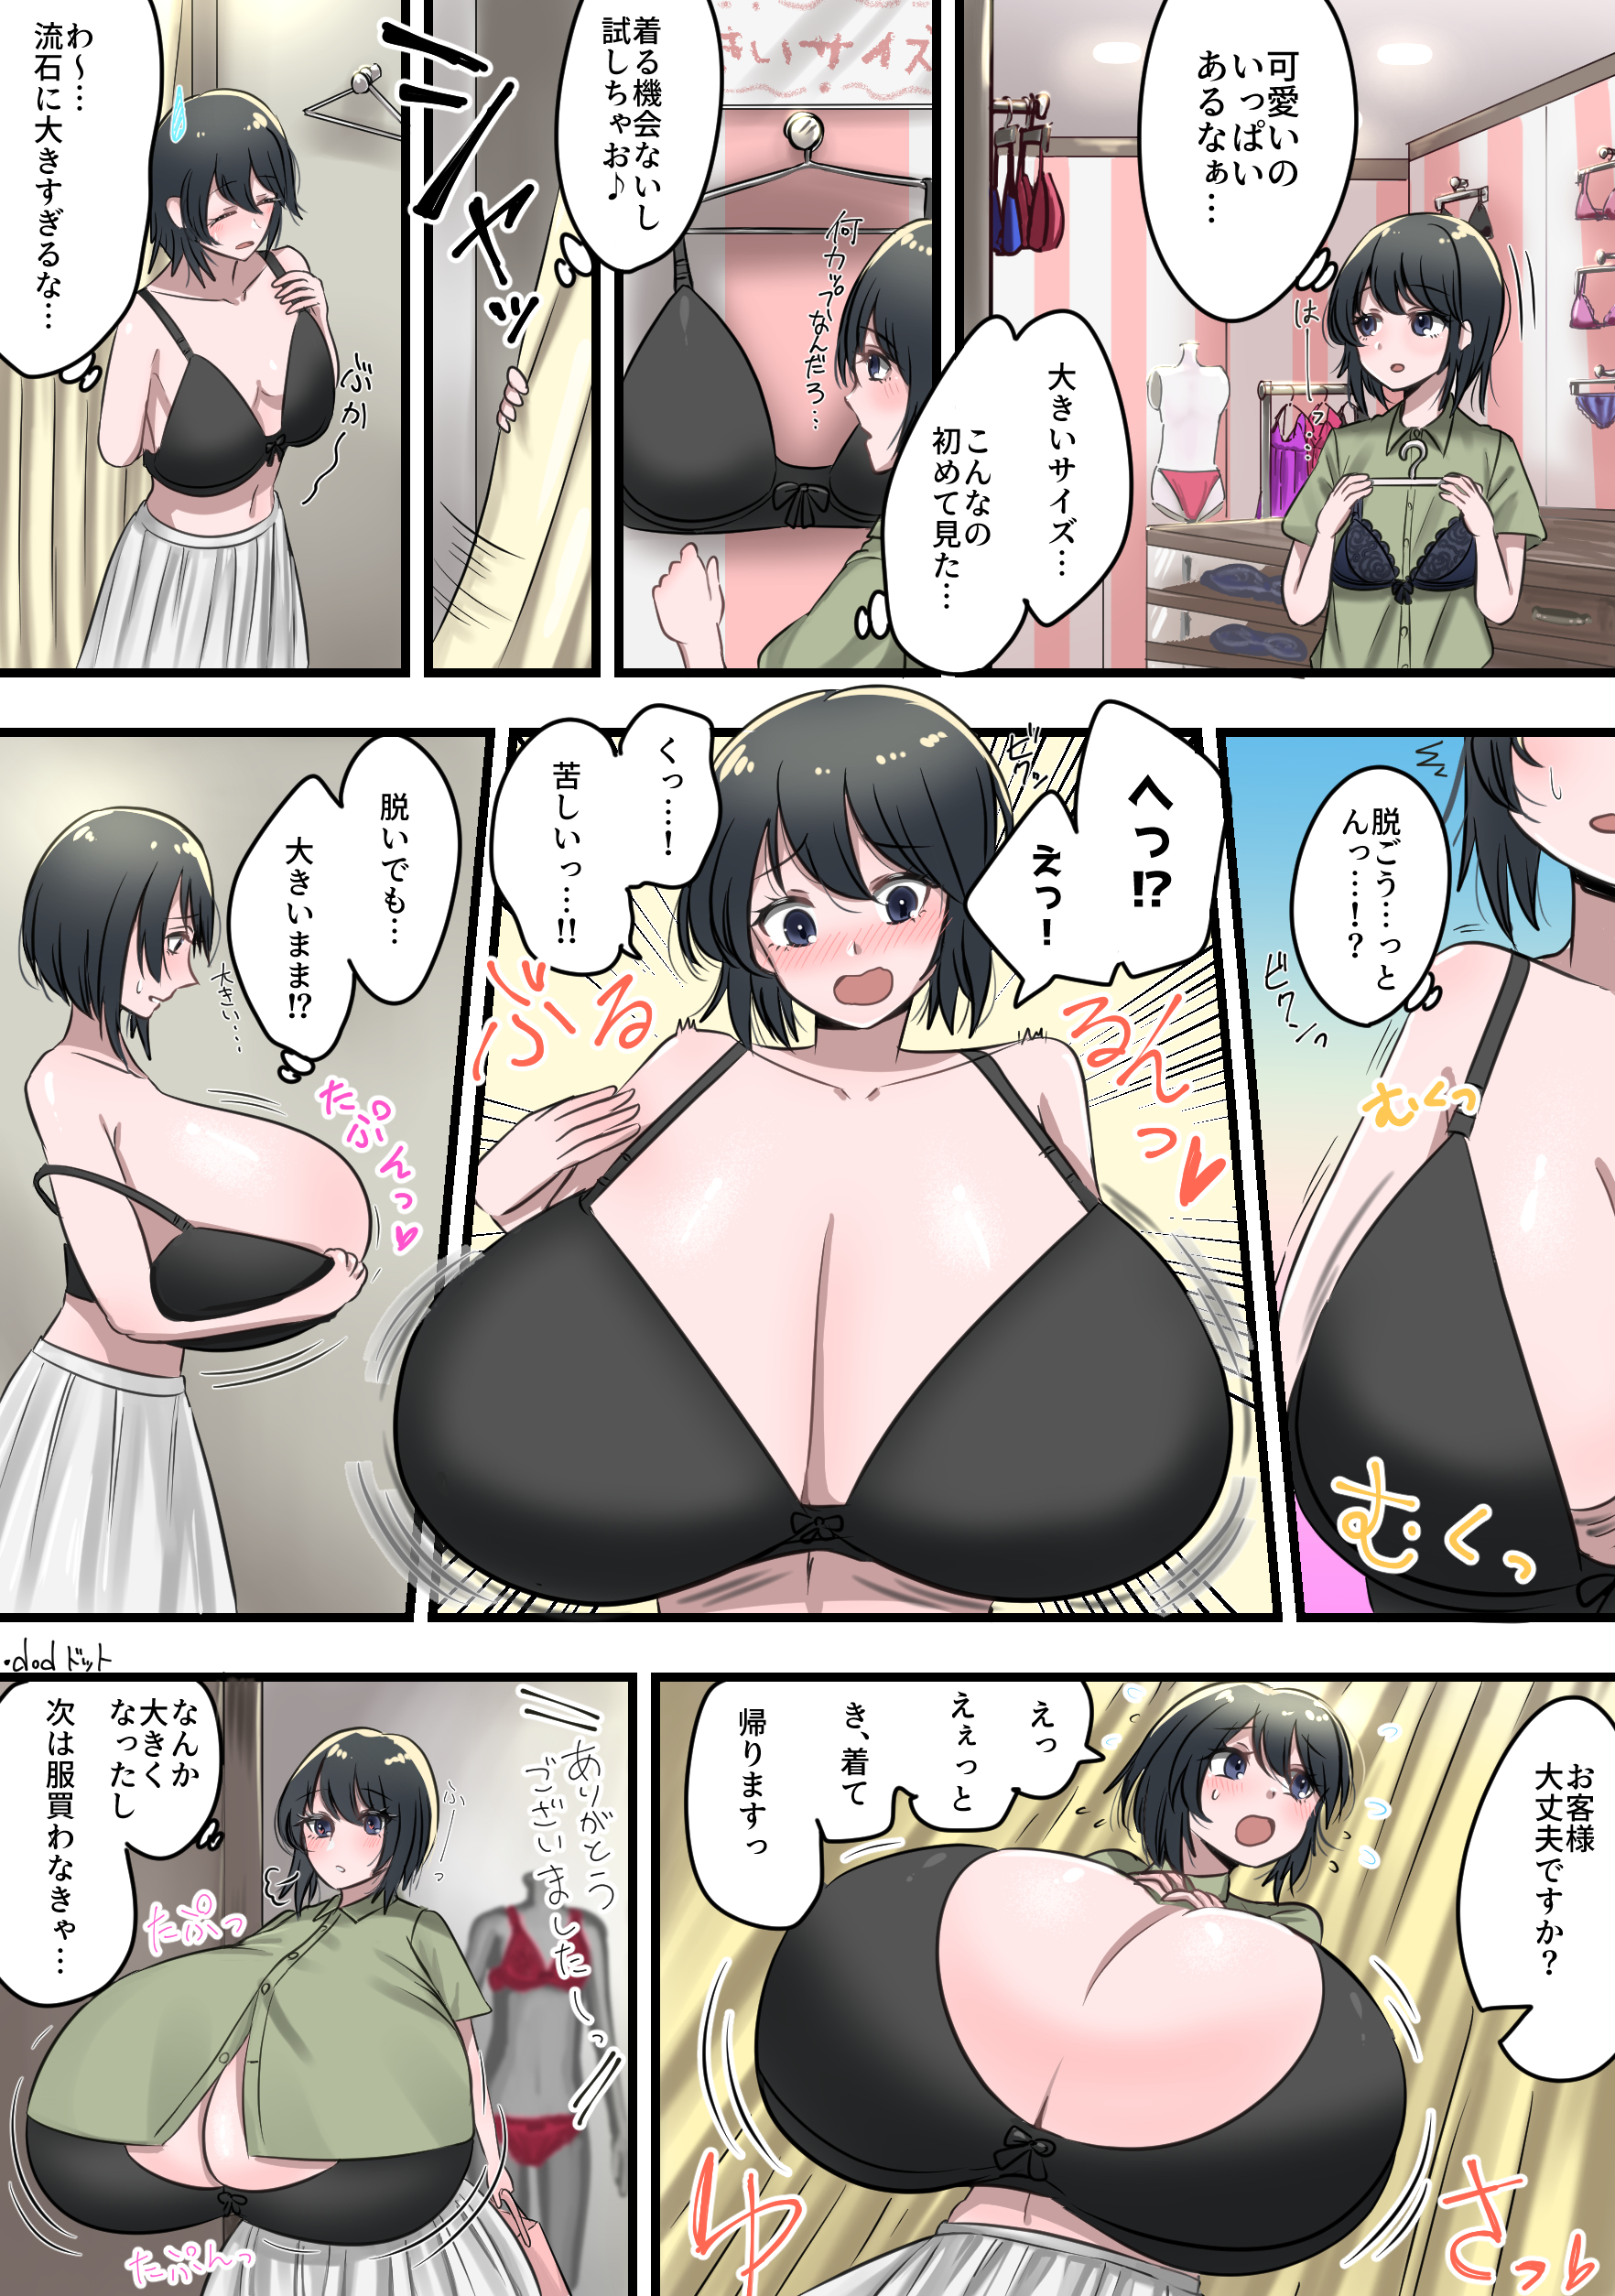 Breast expansion anime comic